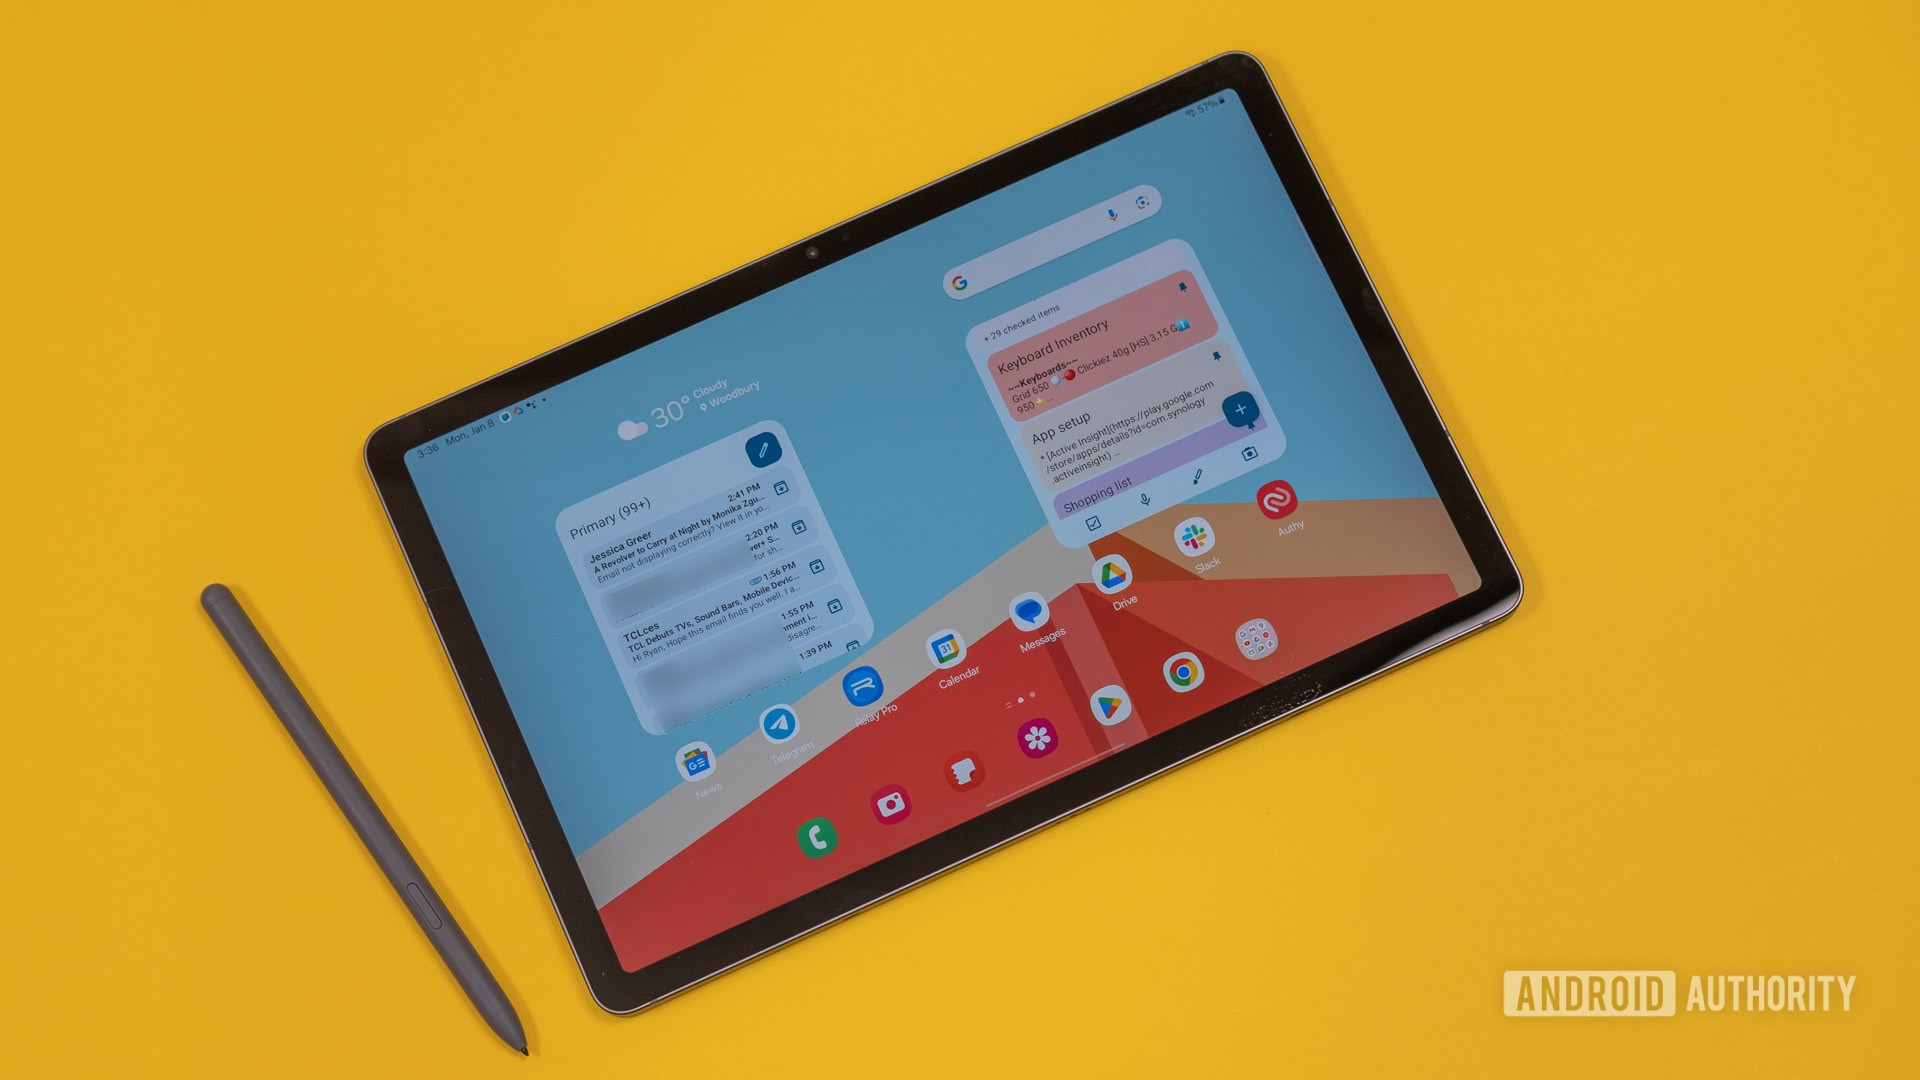 Samsung Galaxy Tab S9 FE and S9 FE Plus: Official Site Hints at Imminent  Launch